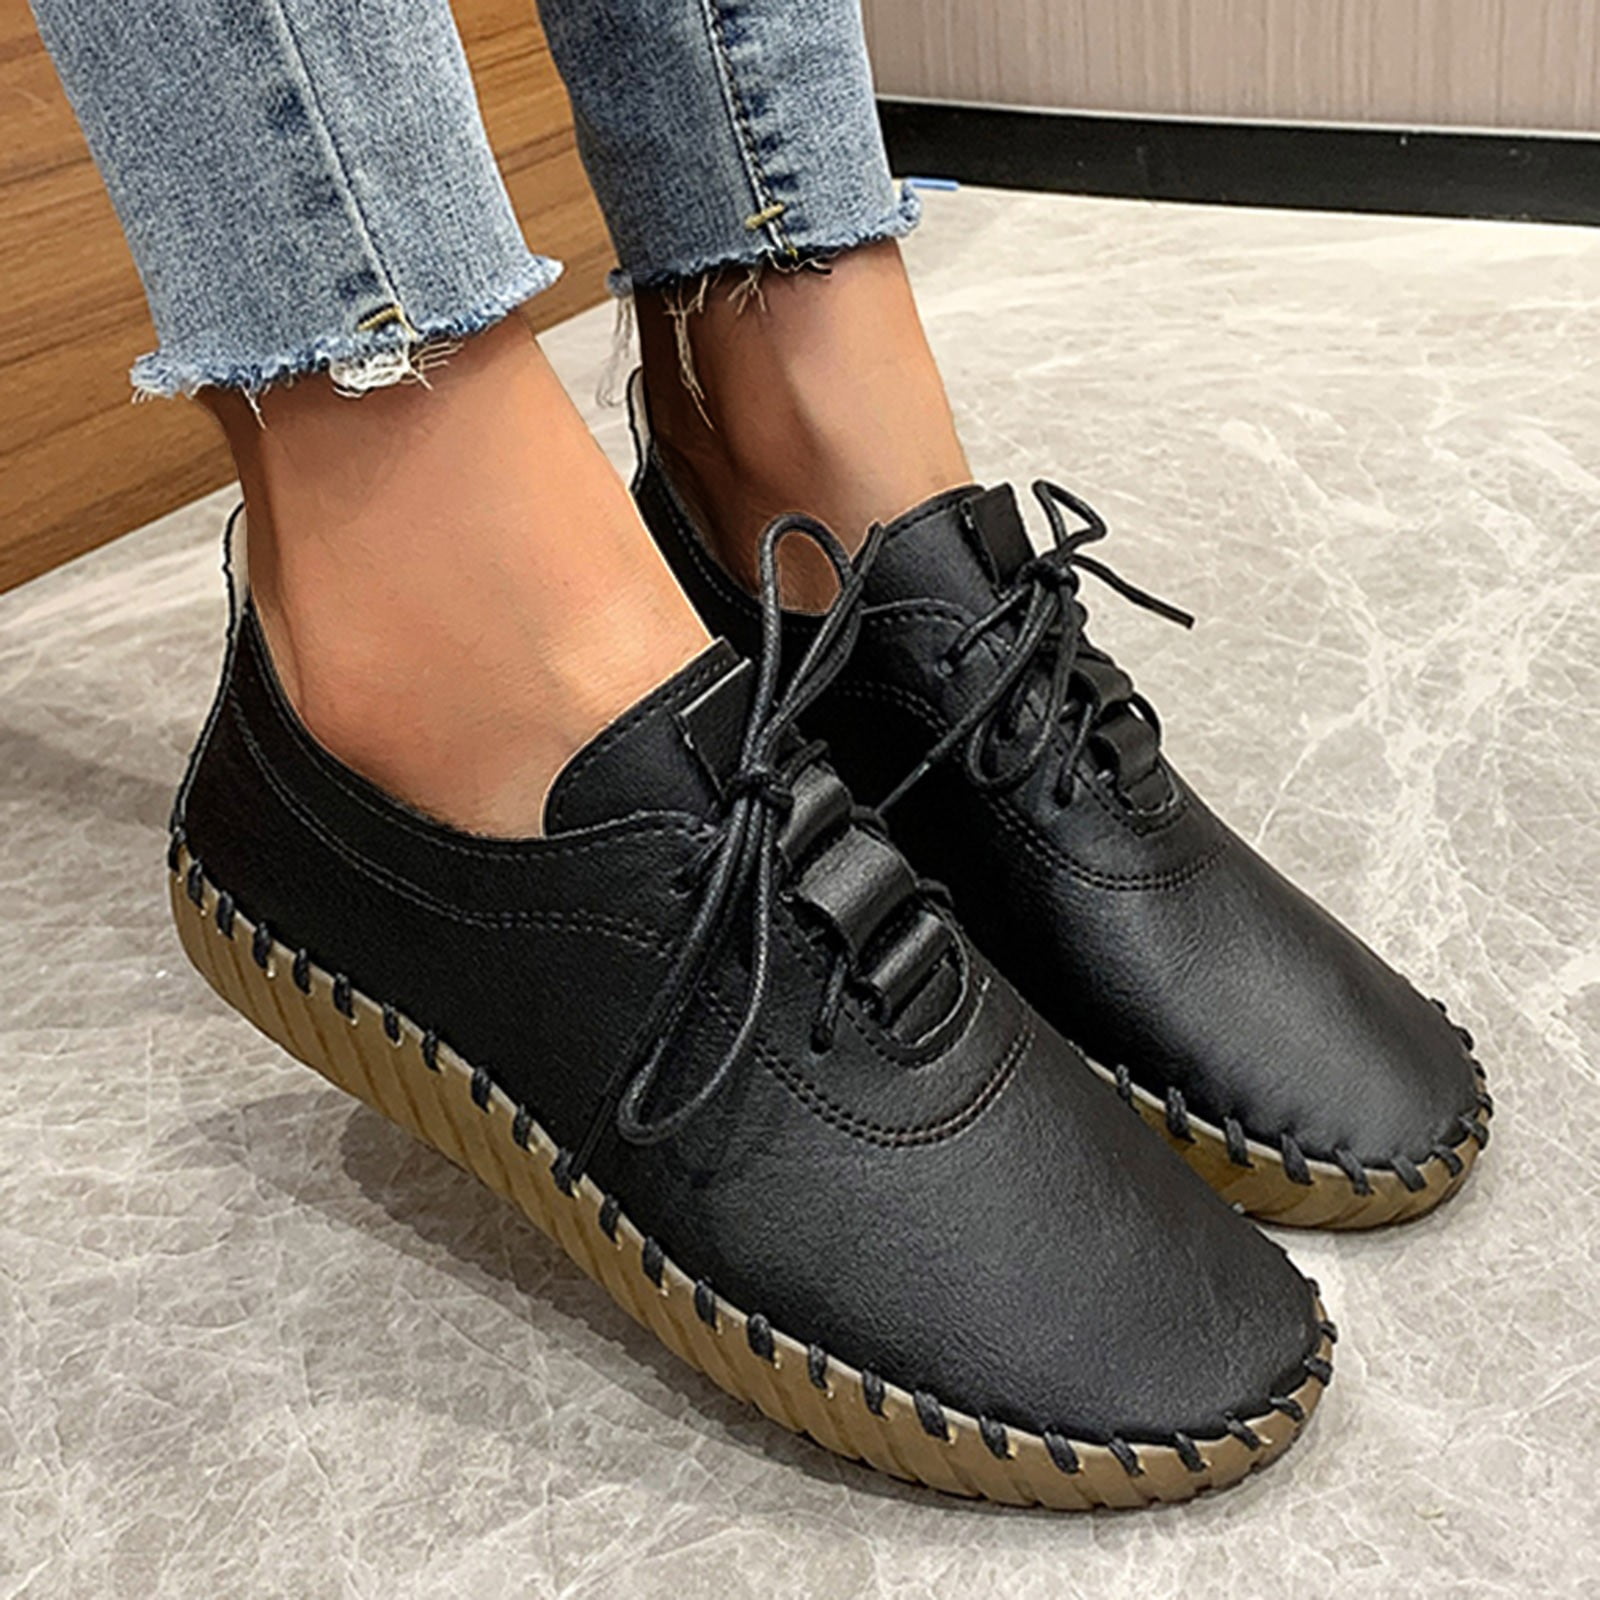 Cathalem Breathable Leisure Fashion Shoes Casual Women's Slipon Women's  casual Comfortable Work Shoes for Women Business Casual Black 7.5 